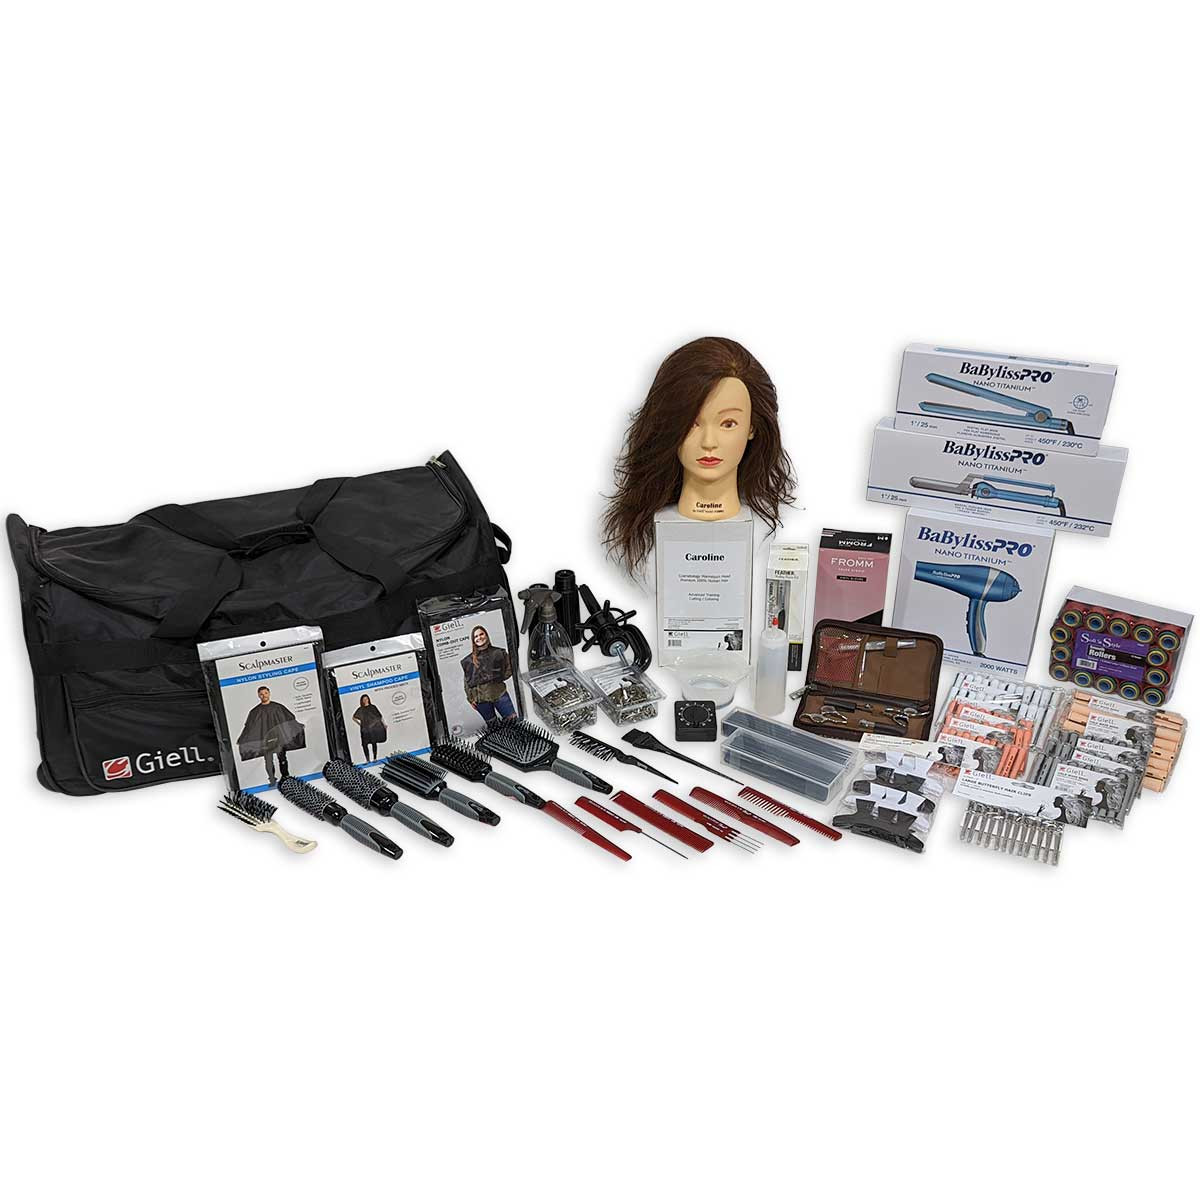 Cosmetology student kit list: The supplies for cosmetology school